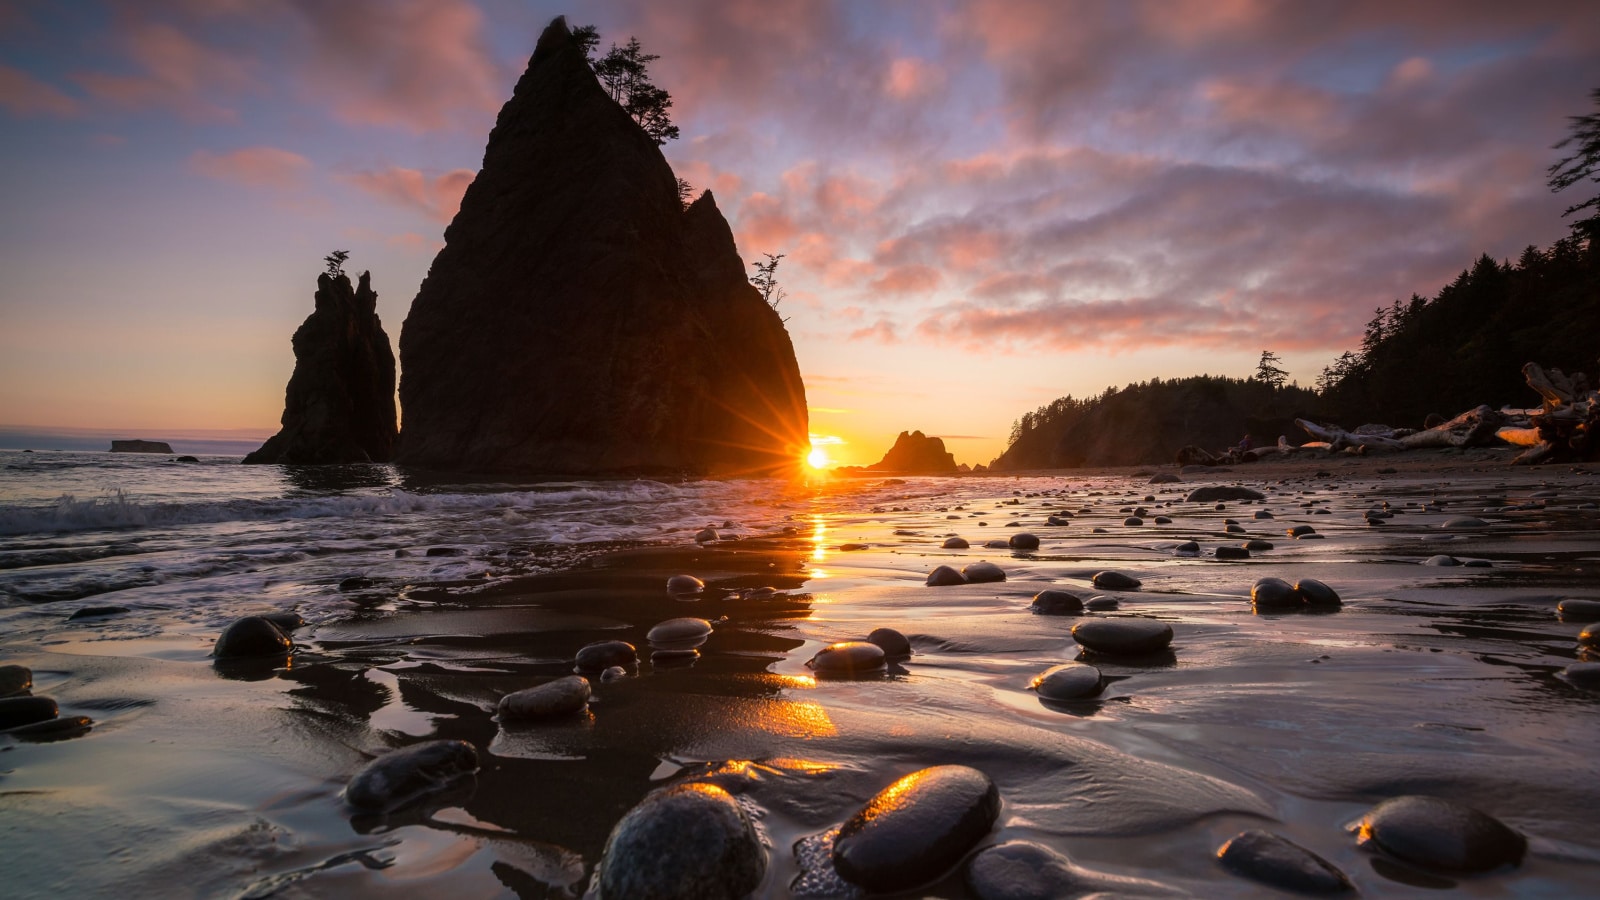 <p>Encompassing diverse ecosystems, including temperate rainforests, rugged mountains, and wild coastline, <a href="https://www.have-clothes-will-travel.com/washington-state-road-trip/" rel="noreferrer noopener">Olympic National Park</a> offers a wide range of outdoor activities and stunning natural beauty.</p>